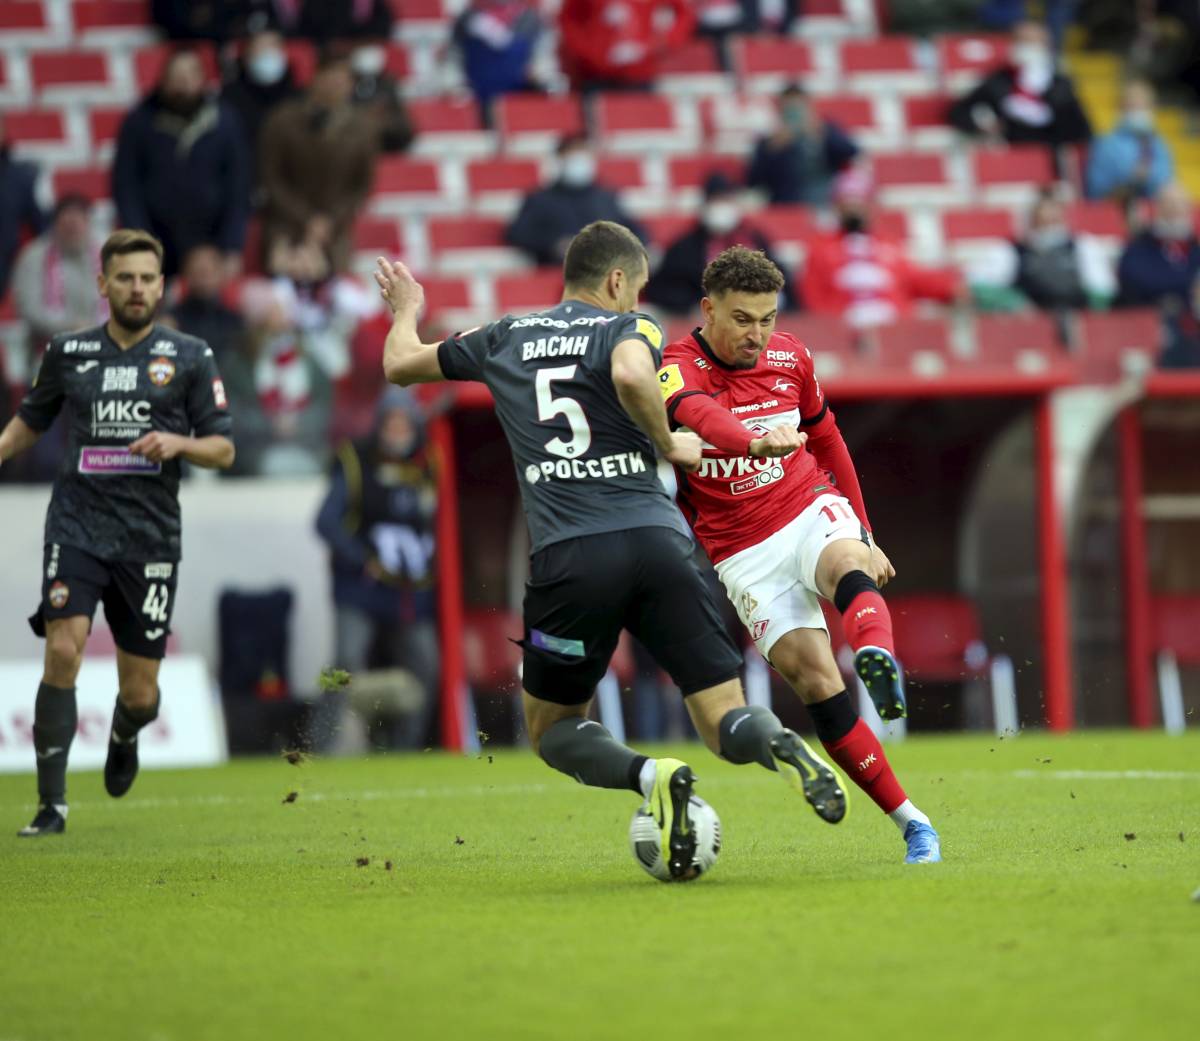 CSKA – Spartak: Forecast and bet on the match from Eduard Mora